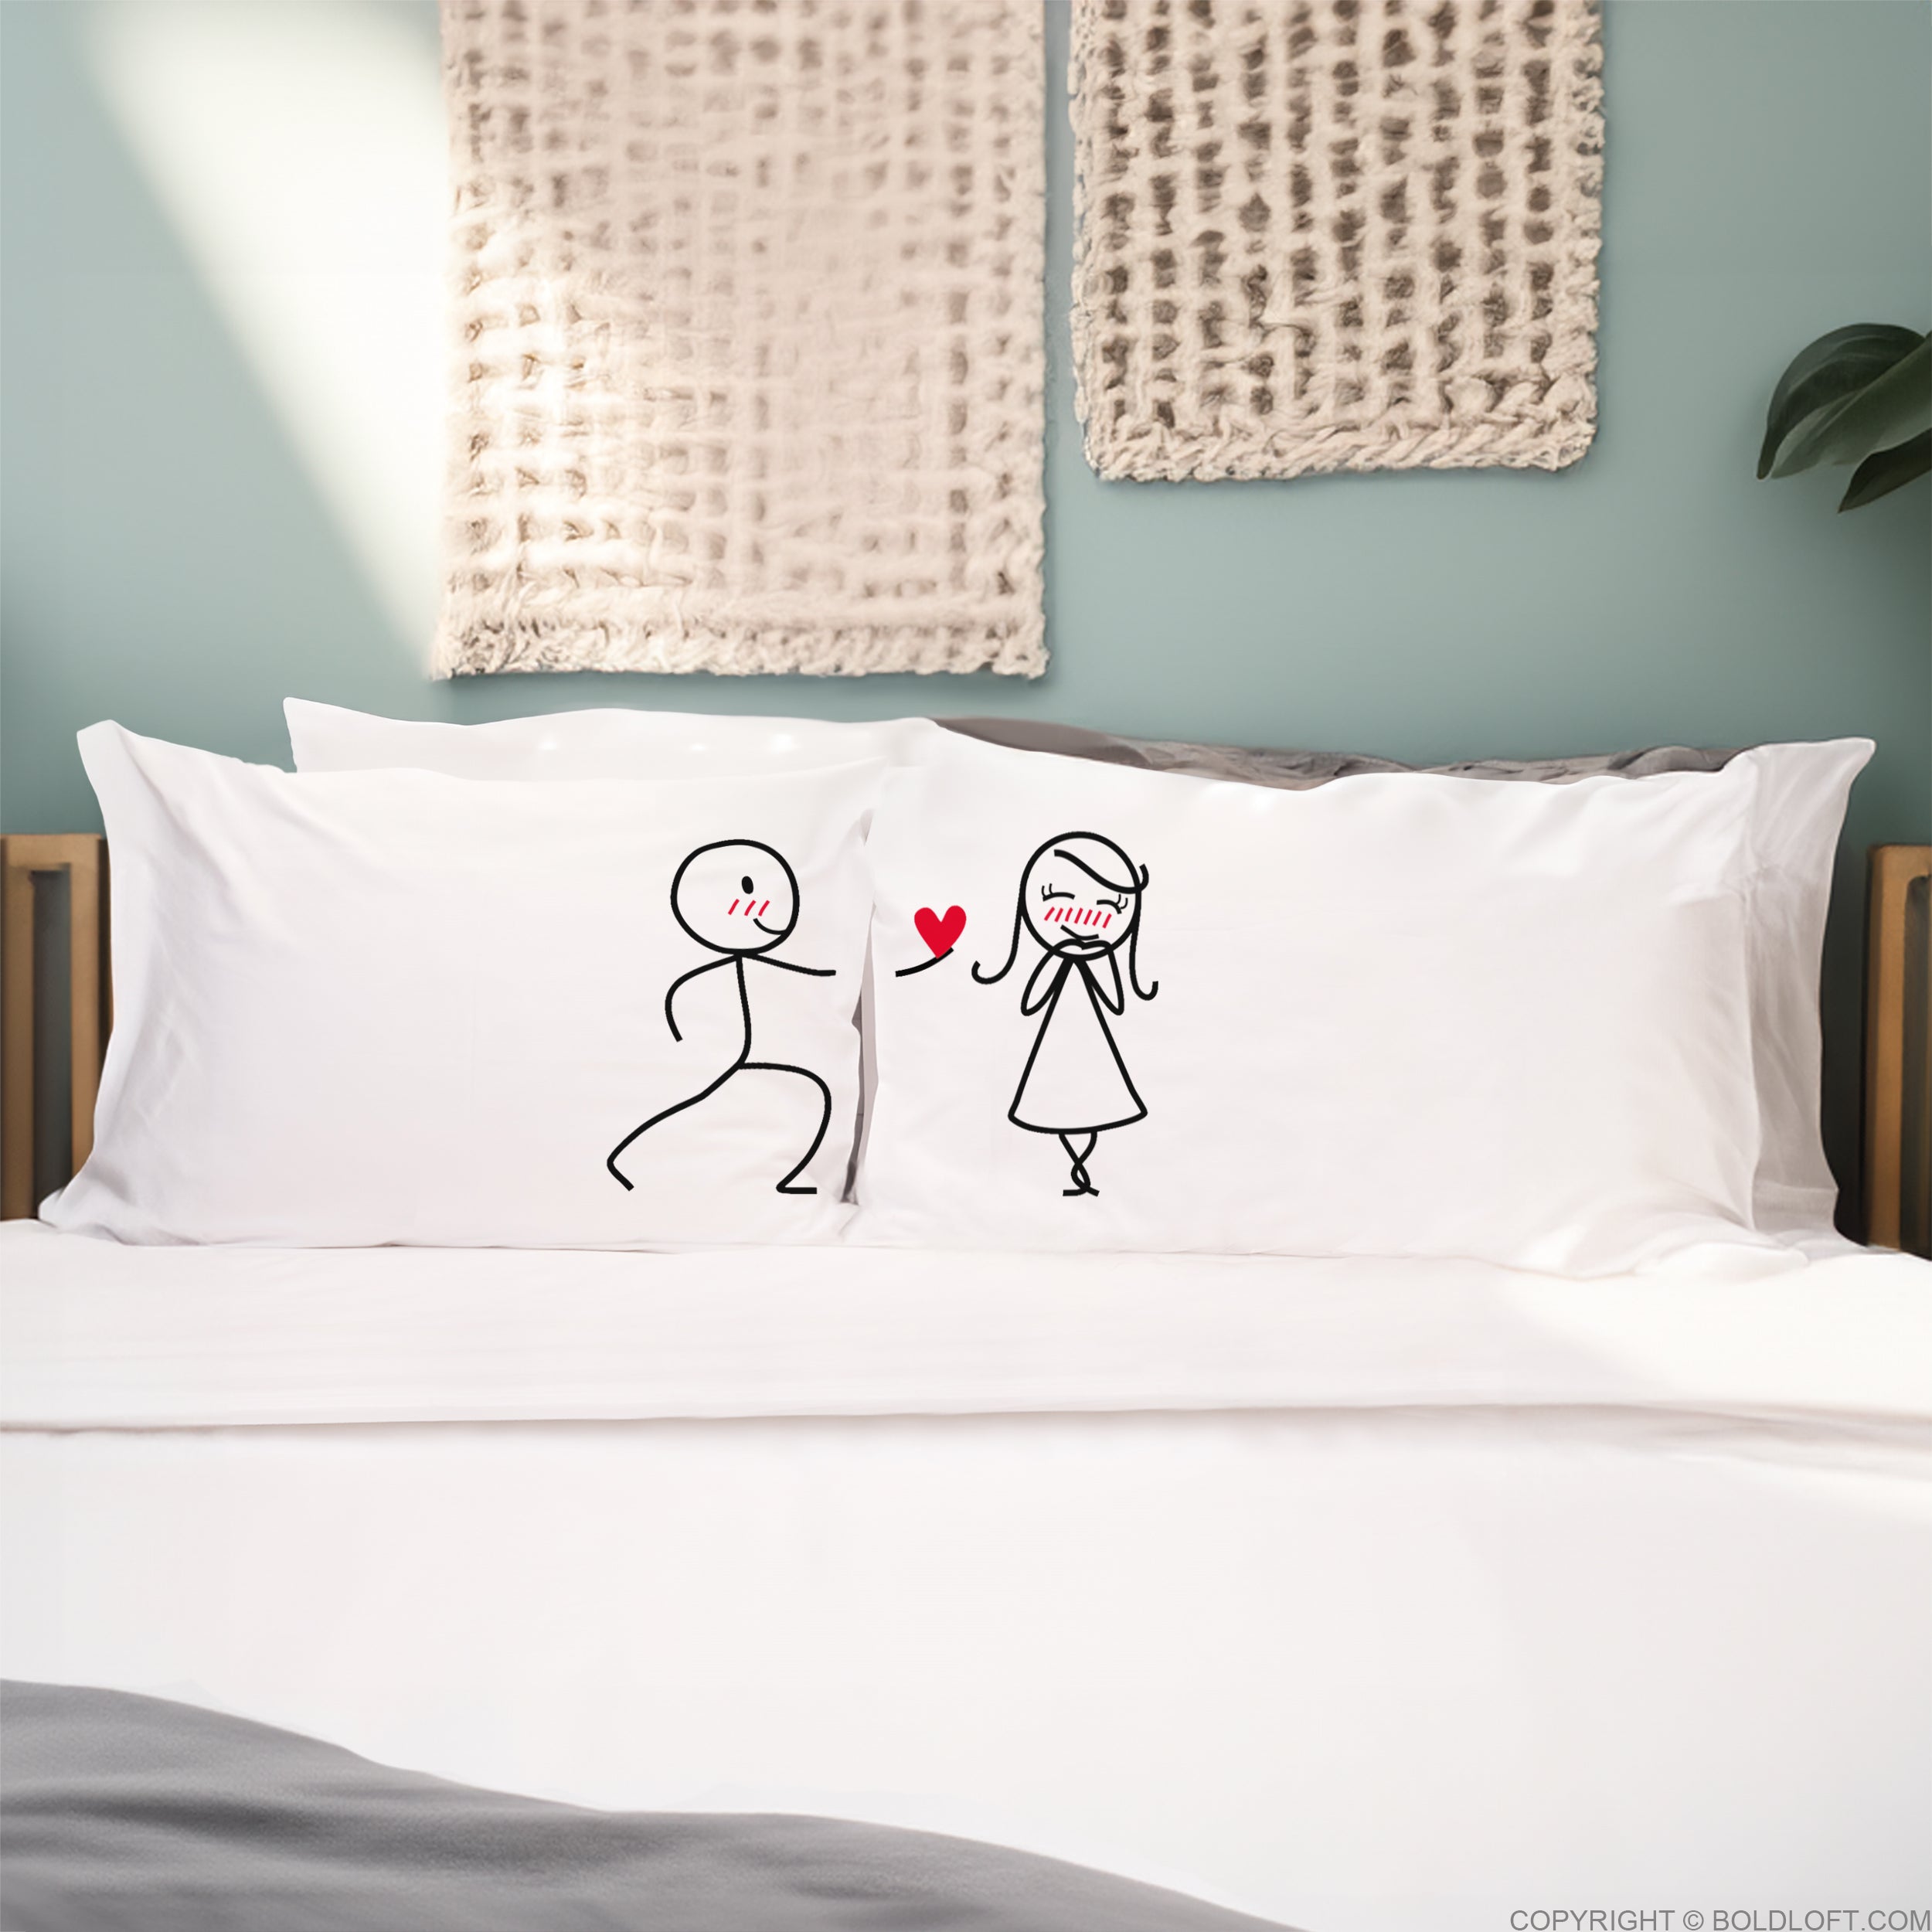 My Heart Belongs to You couple pillowcases, a set of Valentine pillow covers feature 2 cute stick figures